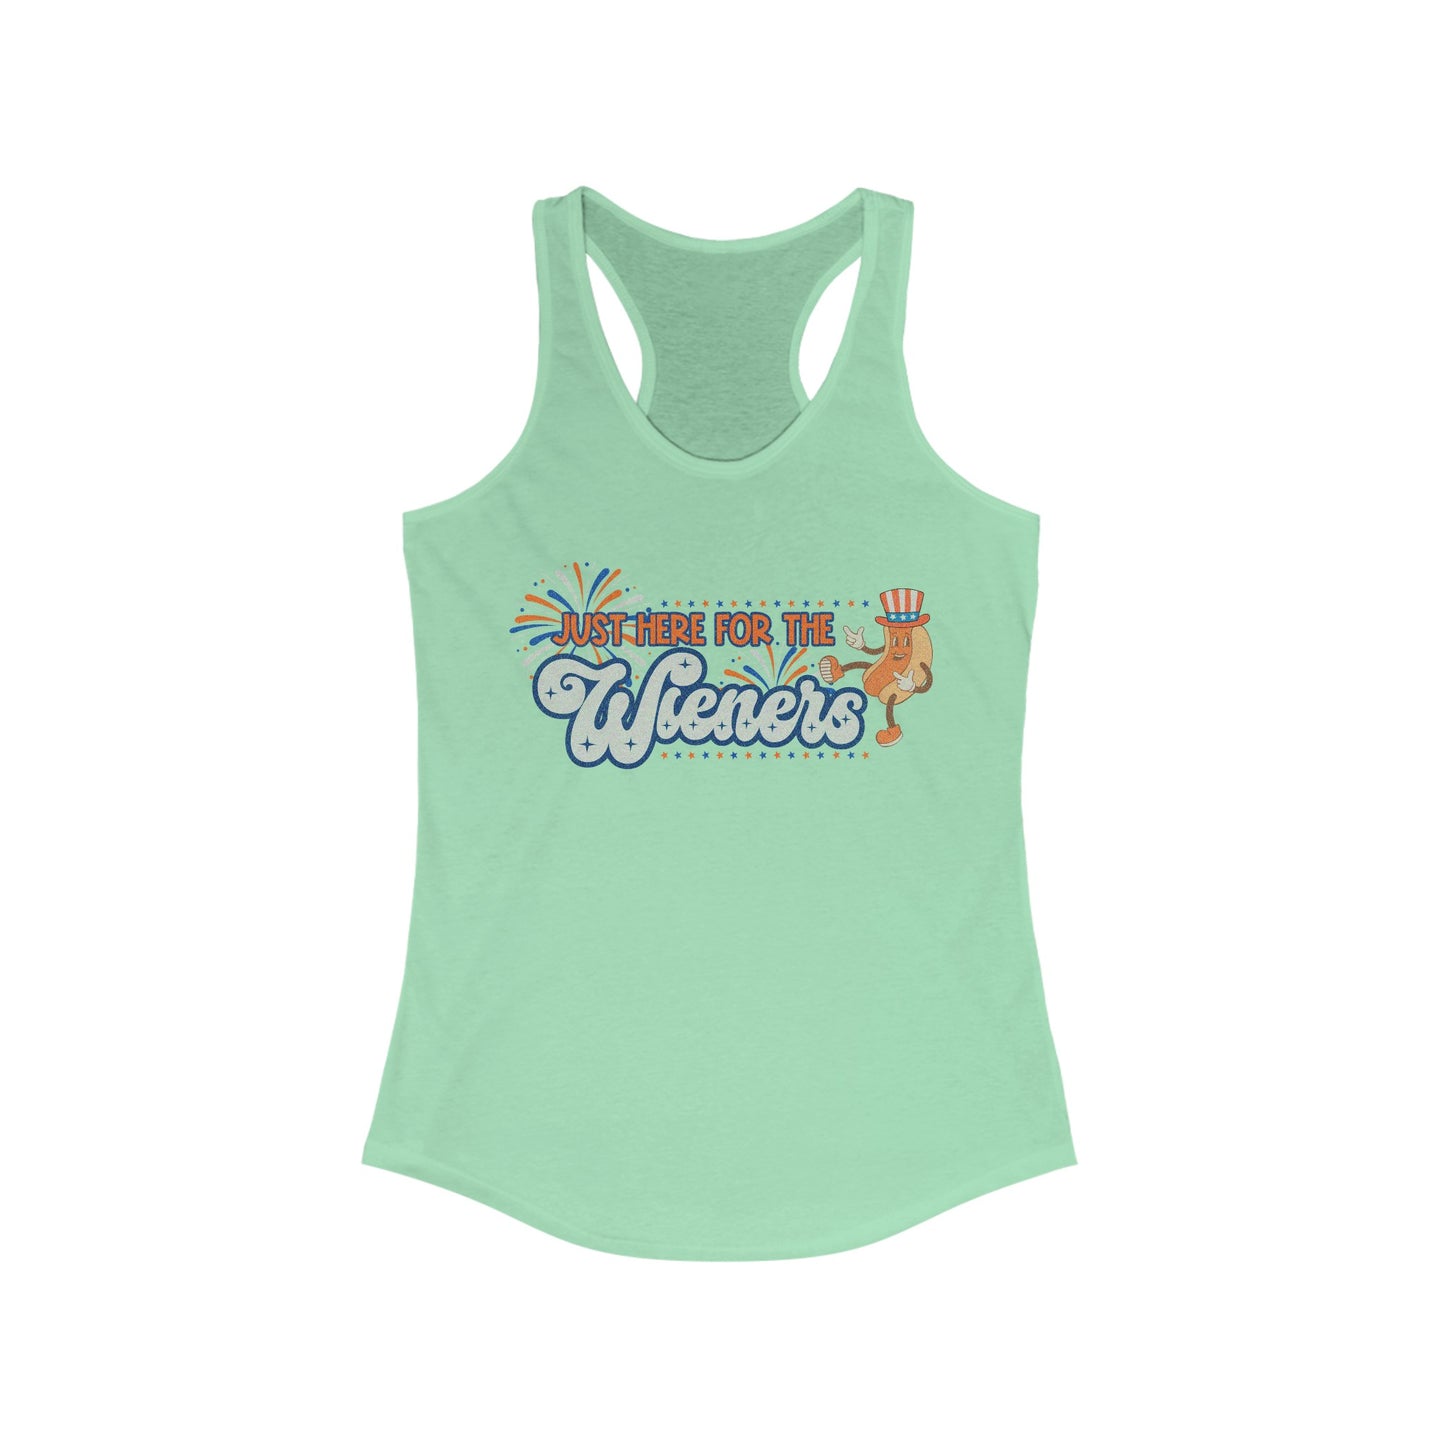 Just Here for the Wieners - Women's Ideal Racerback Tank